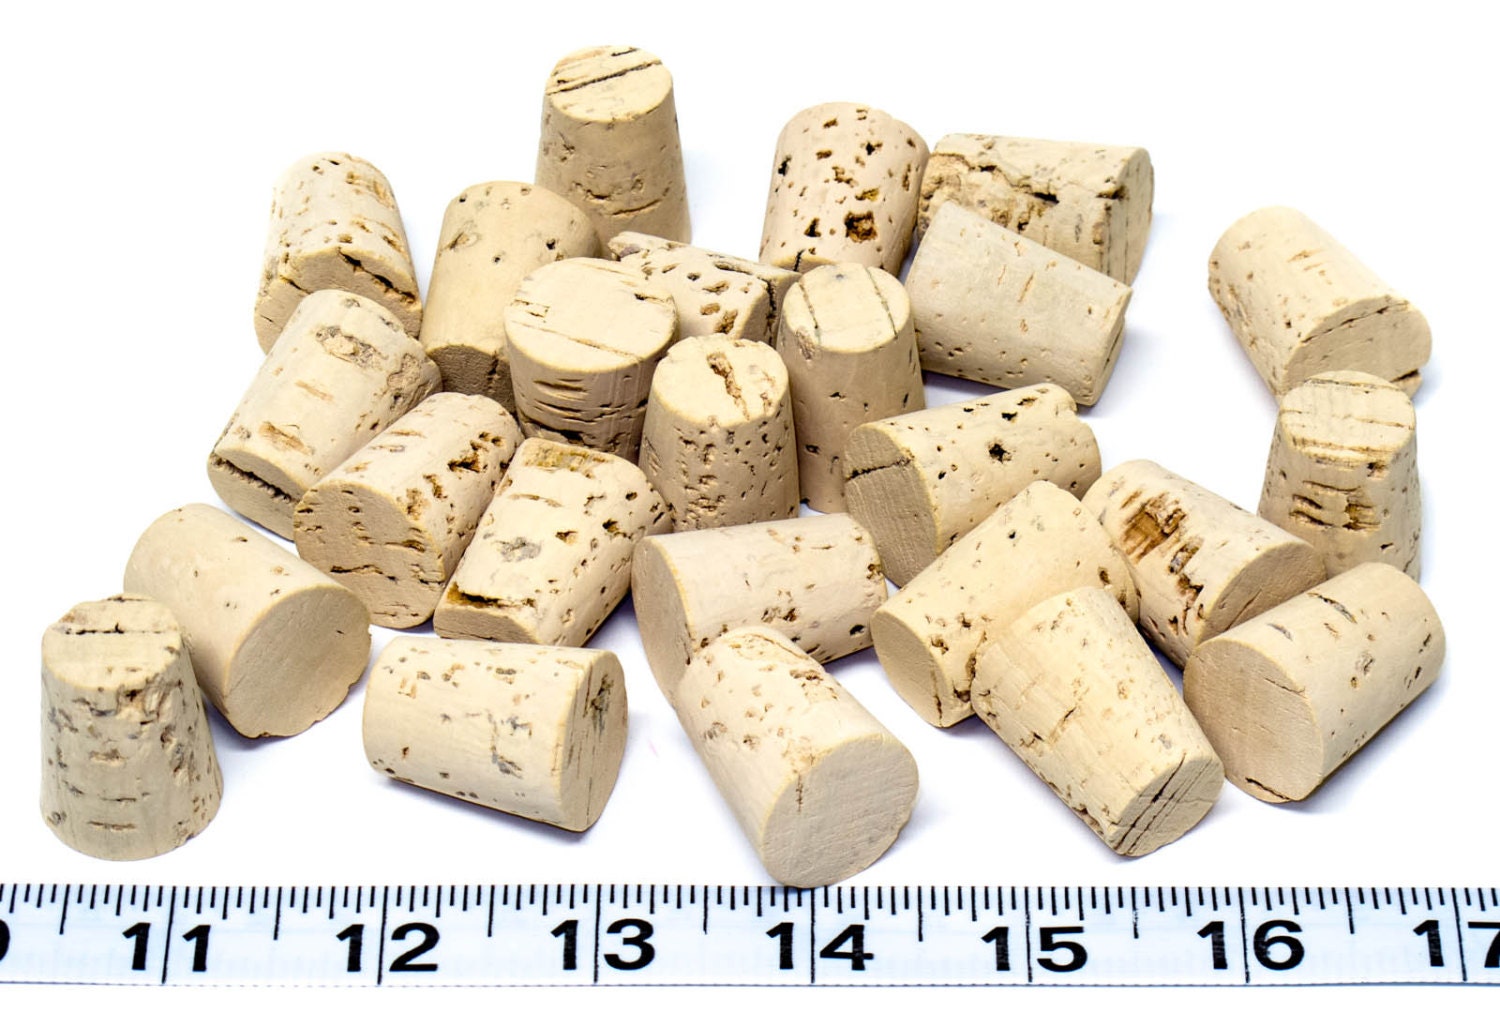 Small Cork Refills - 25 Qty - Crafting Stoppers - Parrot Toys and Bird Toy Parts by A Bird Toy